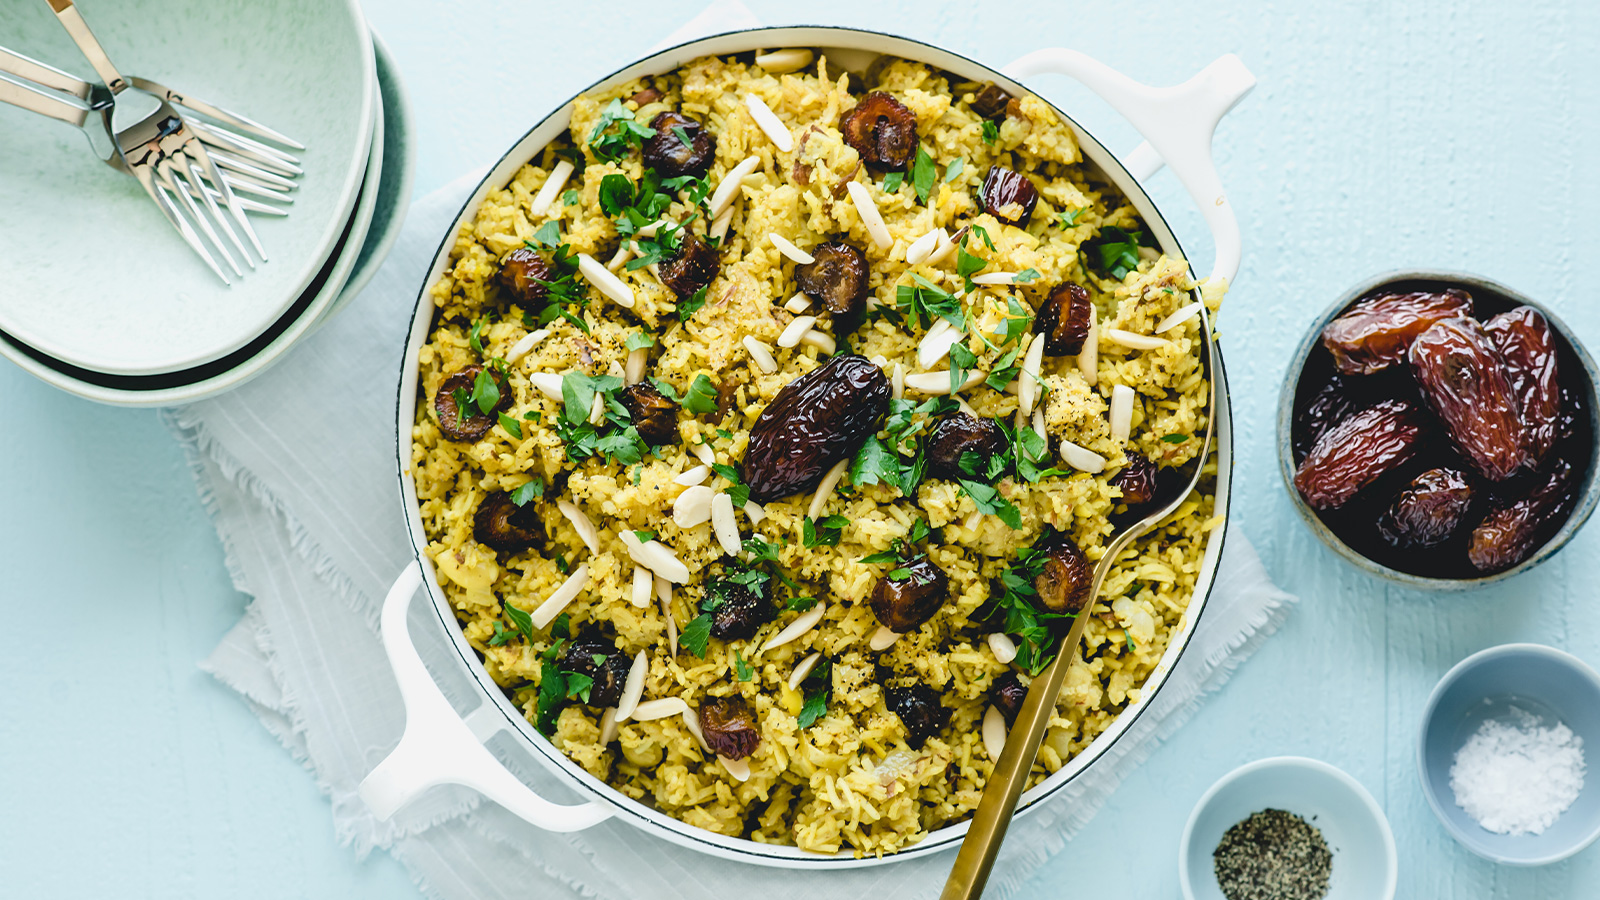 Curry, Date, and Almond Pilaf